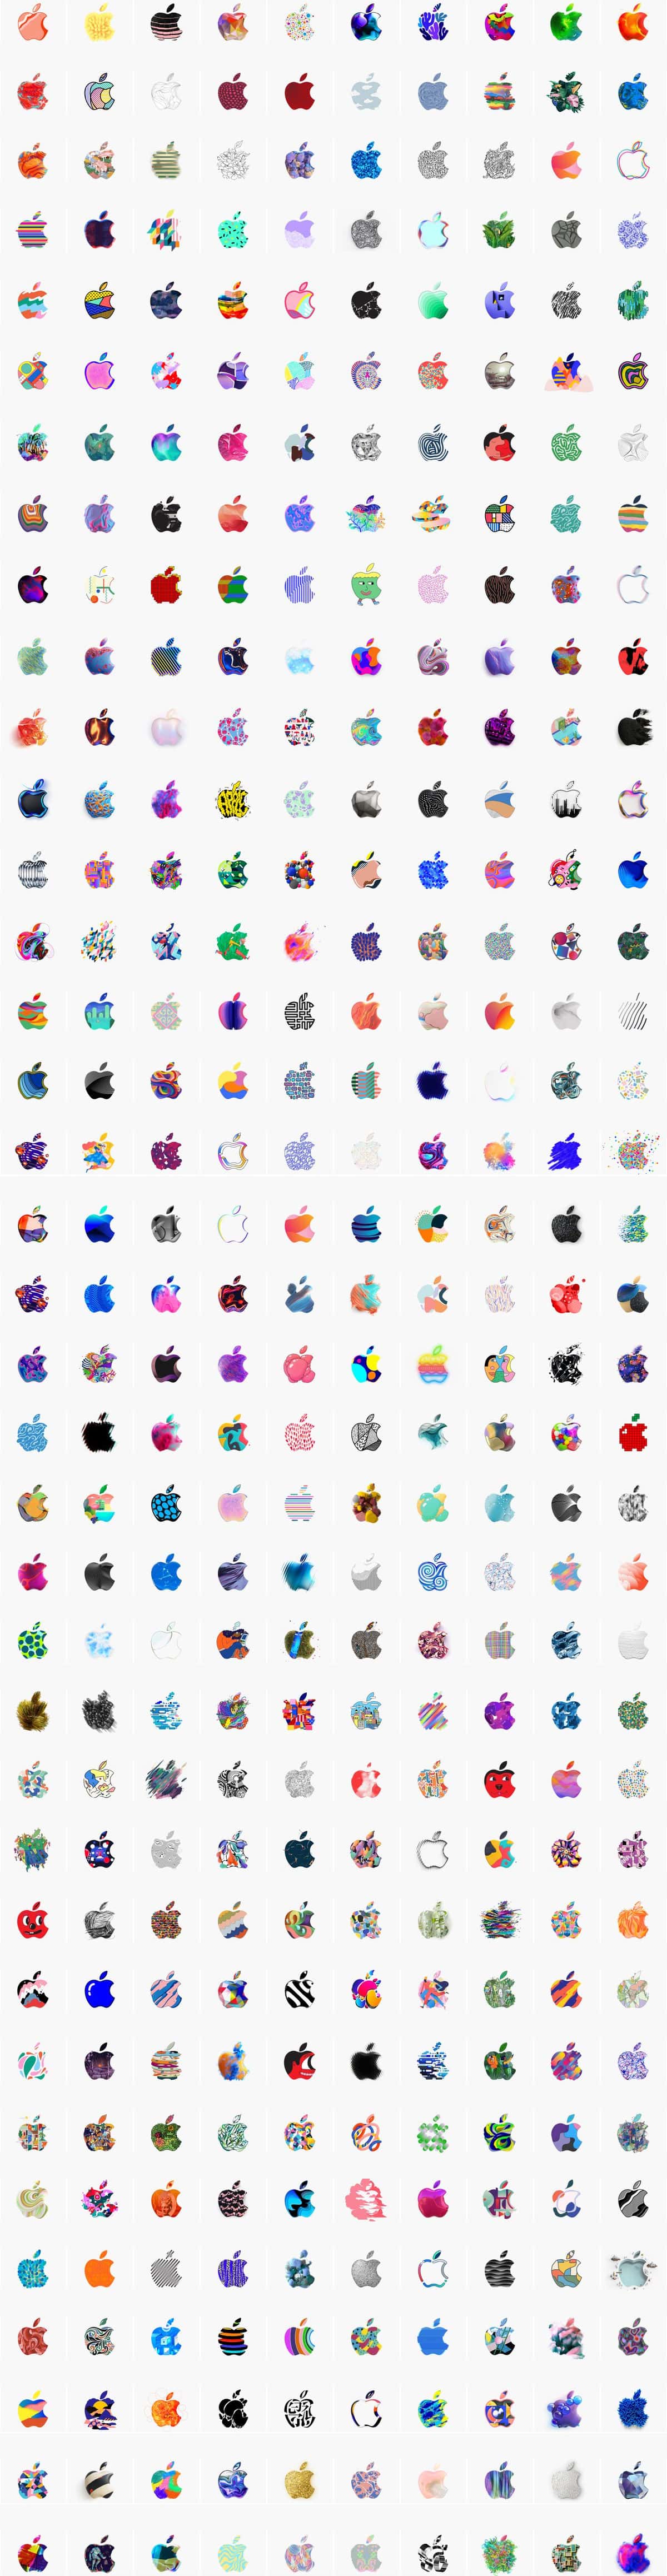 370 Logos from Apple's "There's more in the making" media event